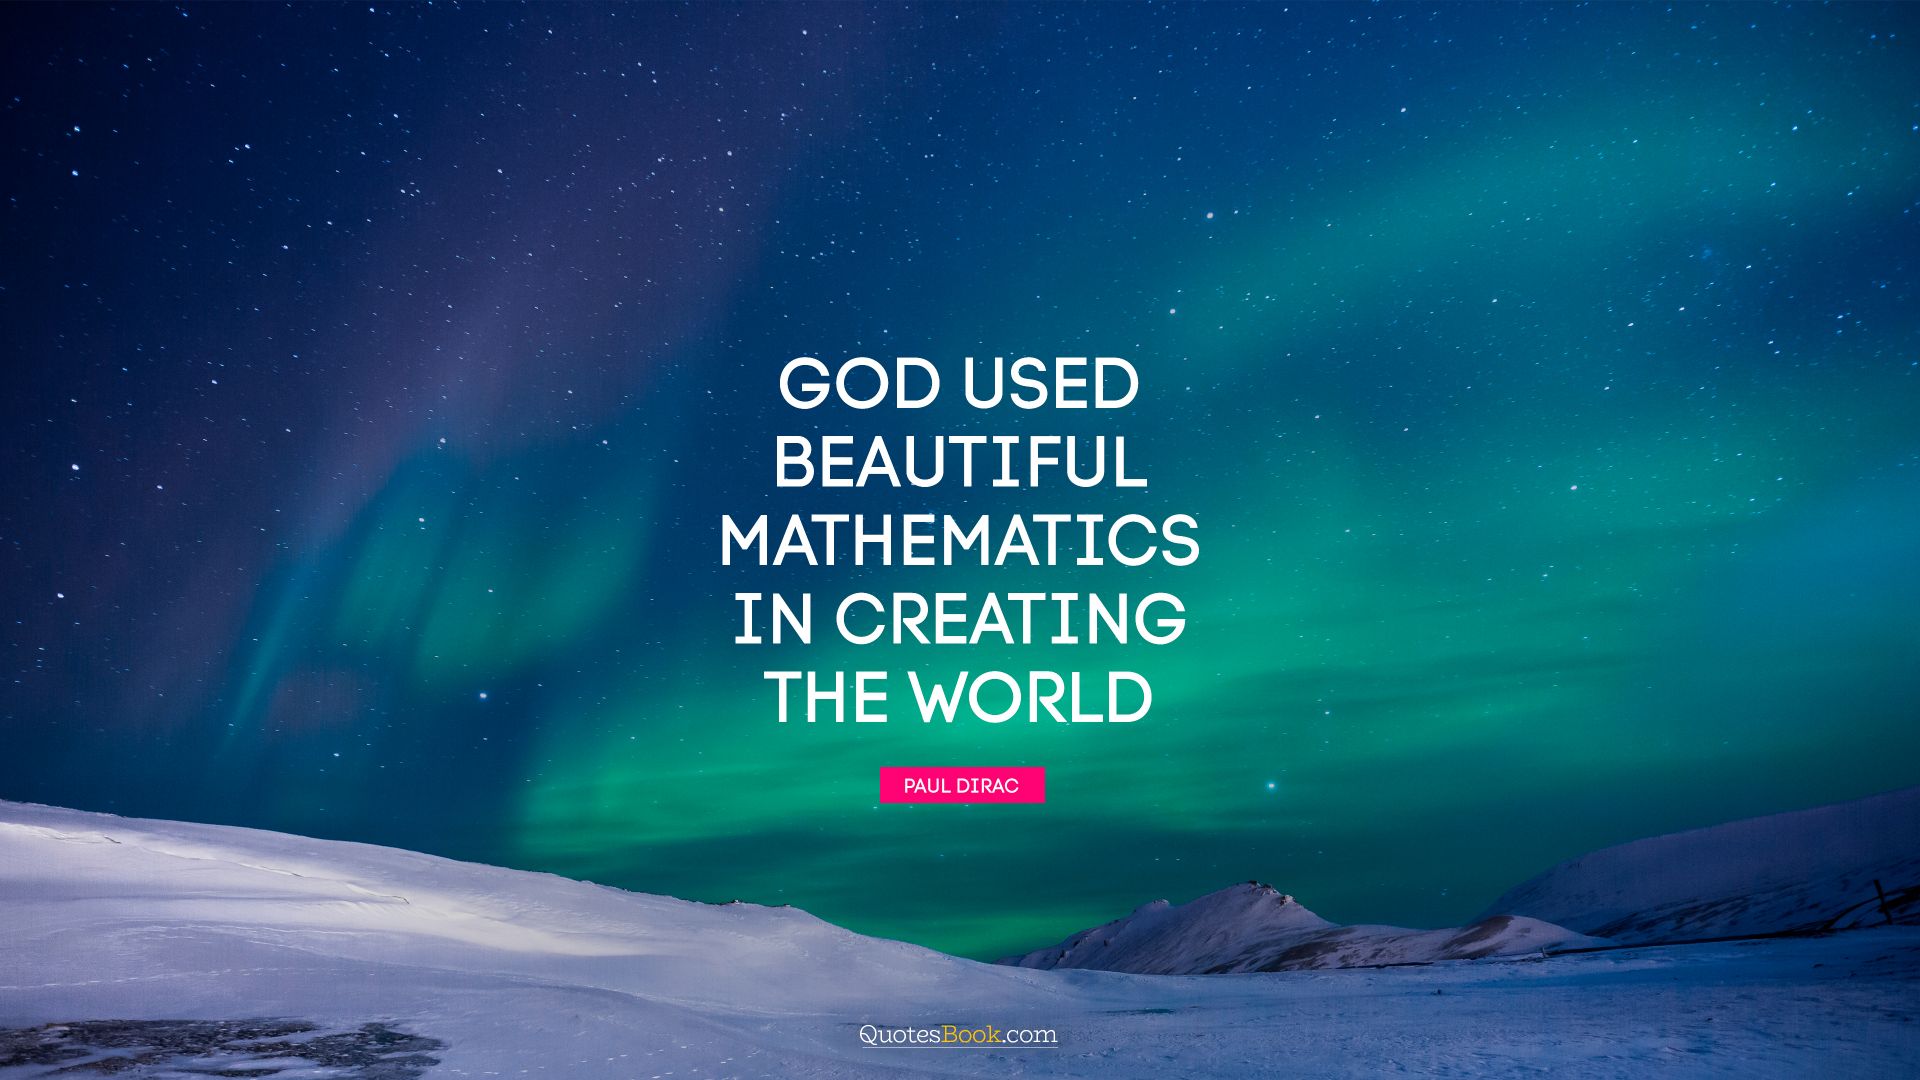 God used beautiful mathematics in creating the world. - Quote by Paul Dirac